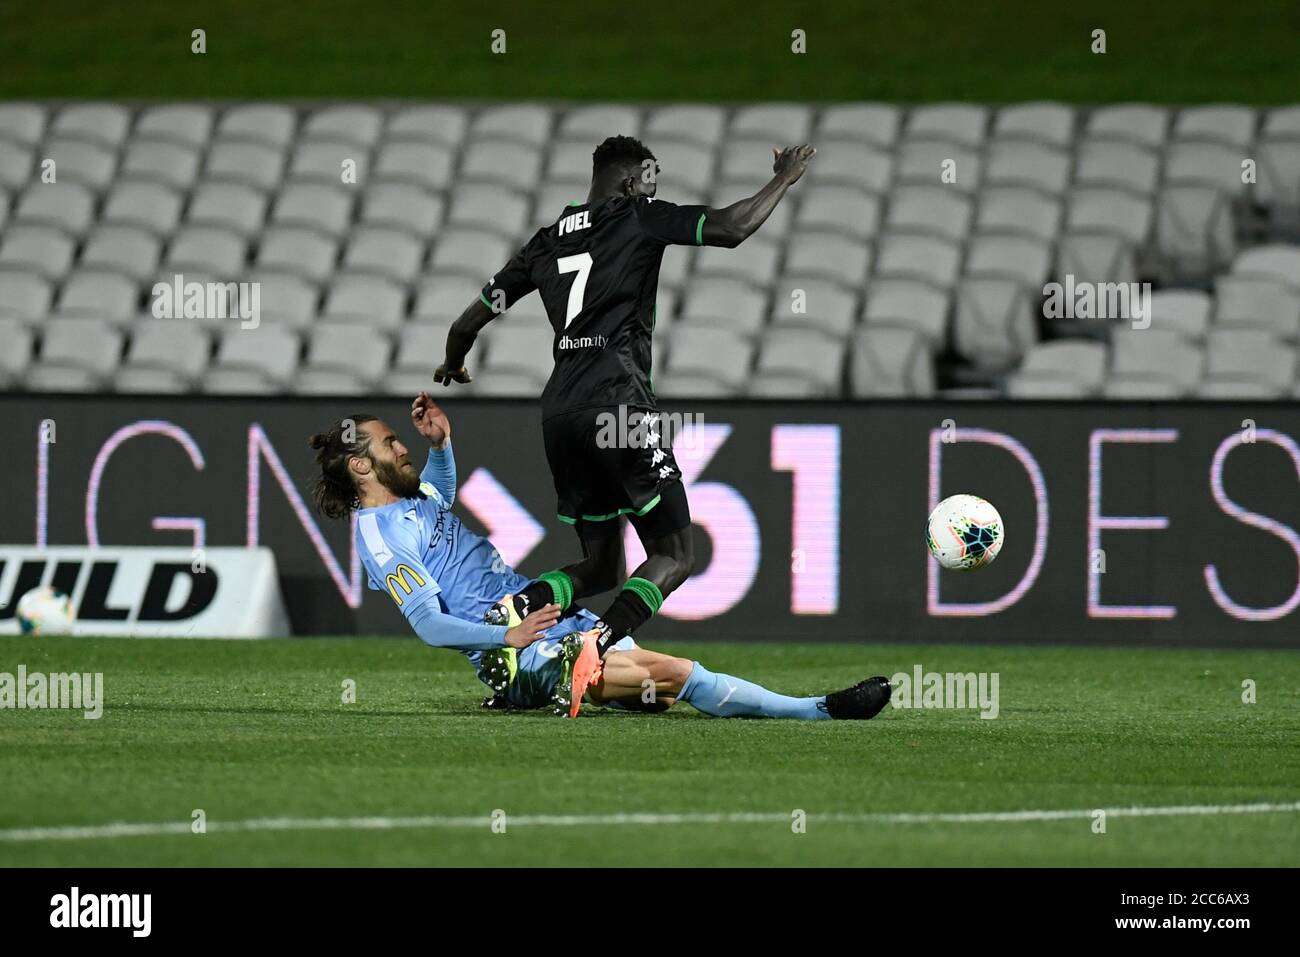 19th August 2020; Jubilee Oval, Sydney, New South Wales, Australia; A League Football, Western United FC versus Melbourne City FC; Joshua Brillante of Melbourne City tackles Kuach Yuel of Western United Stock Photo